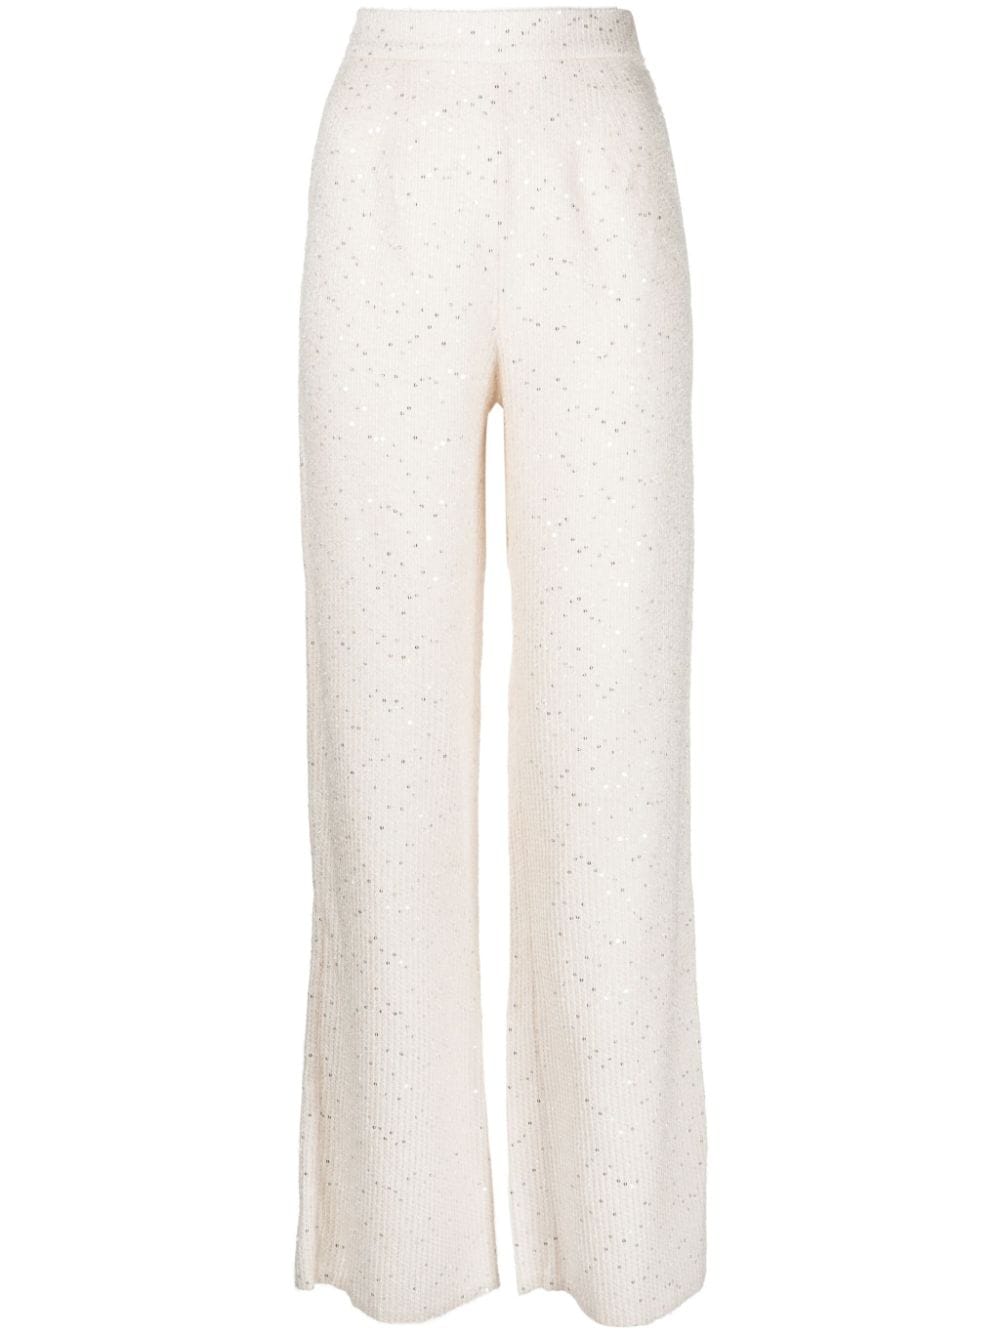 Saiid Kobeisy Sequin-embellished Tweed High-waisted Trousers In White